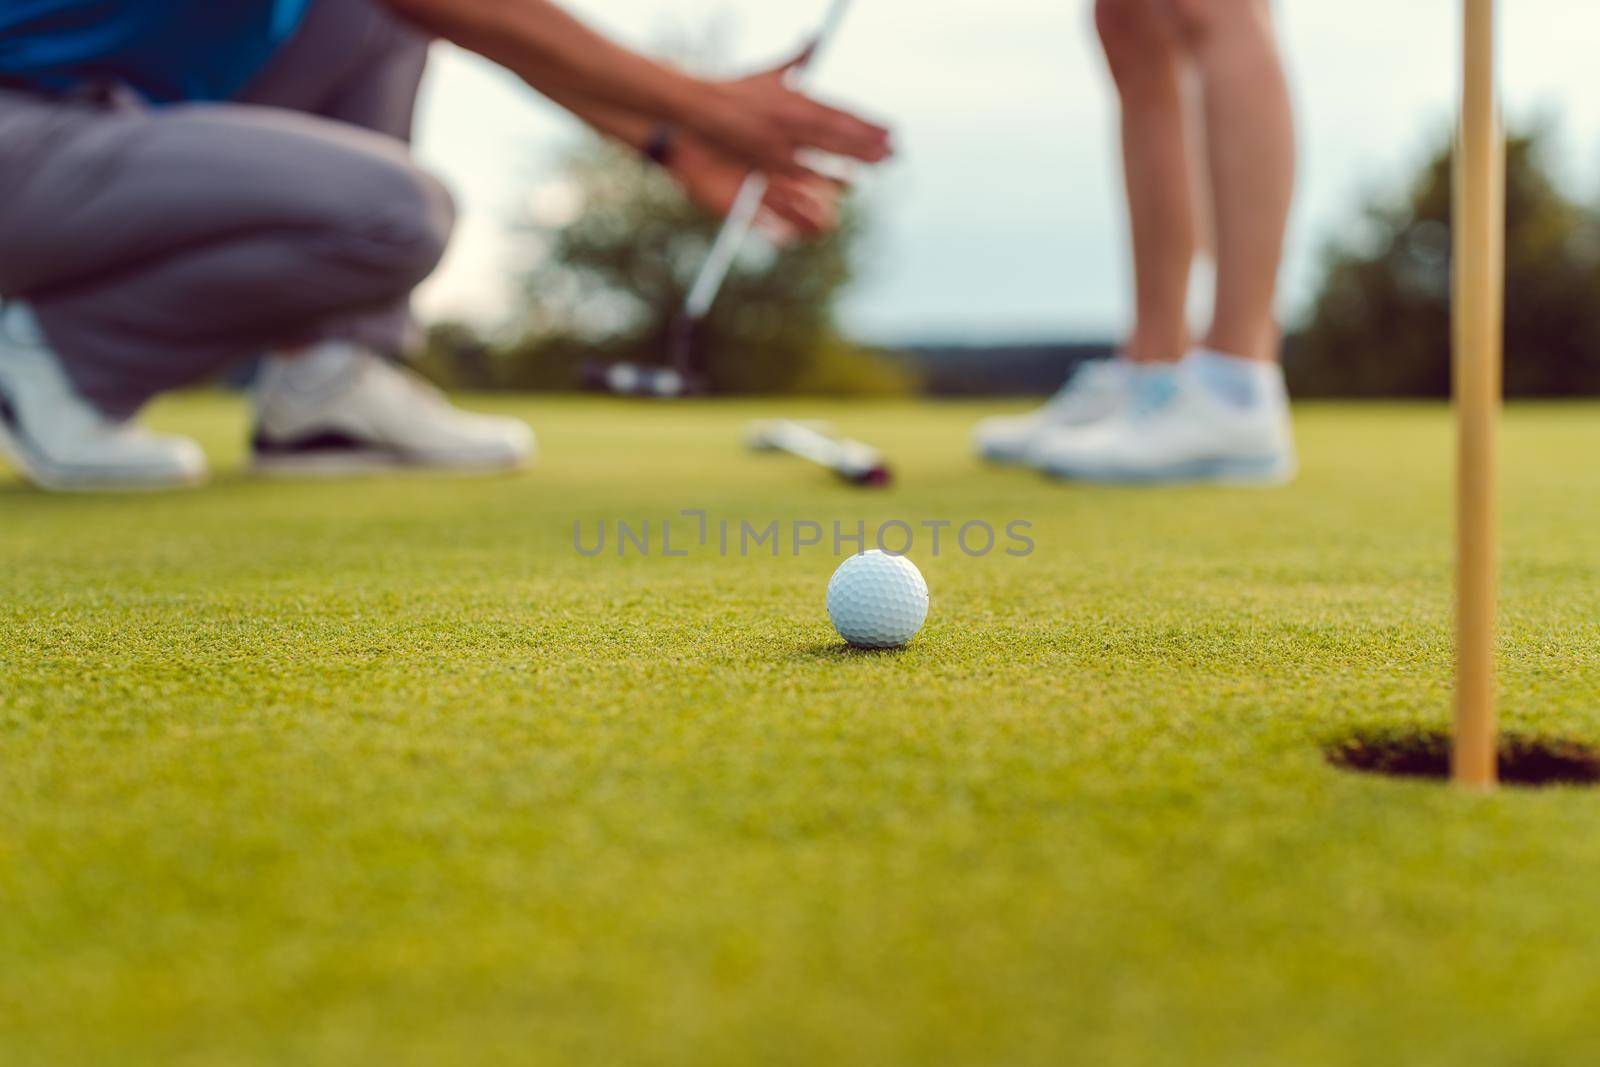 Pro on golf course teaching a woman how to put, close-up